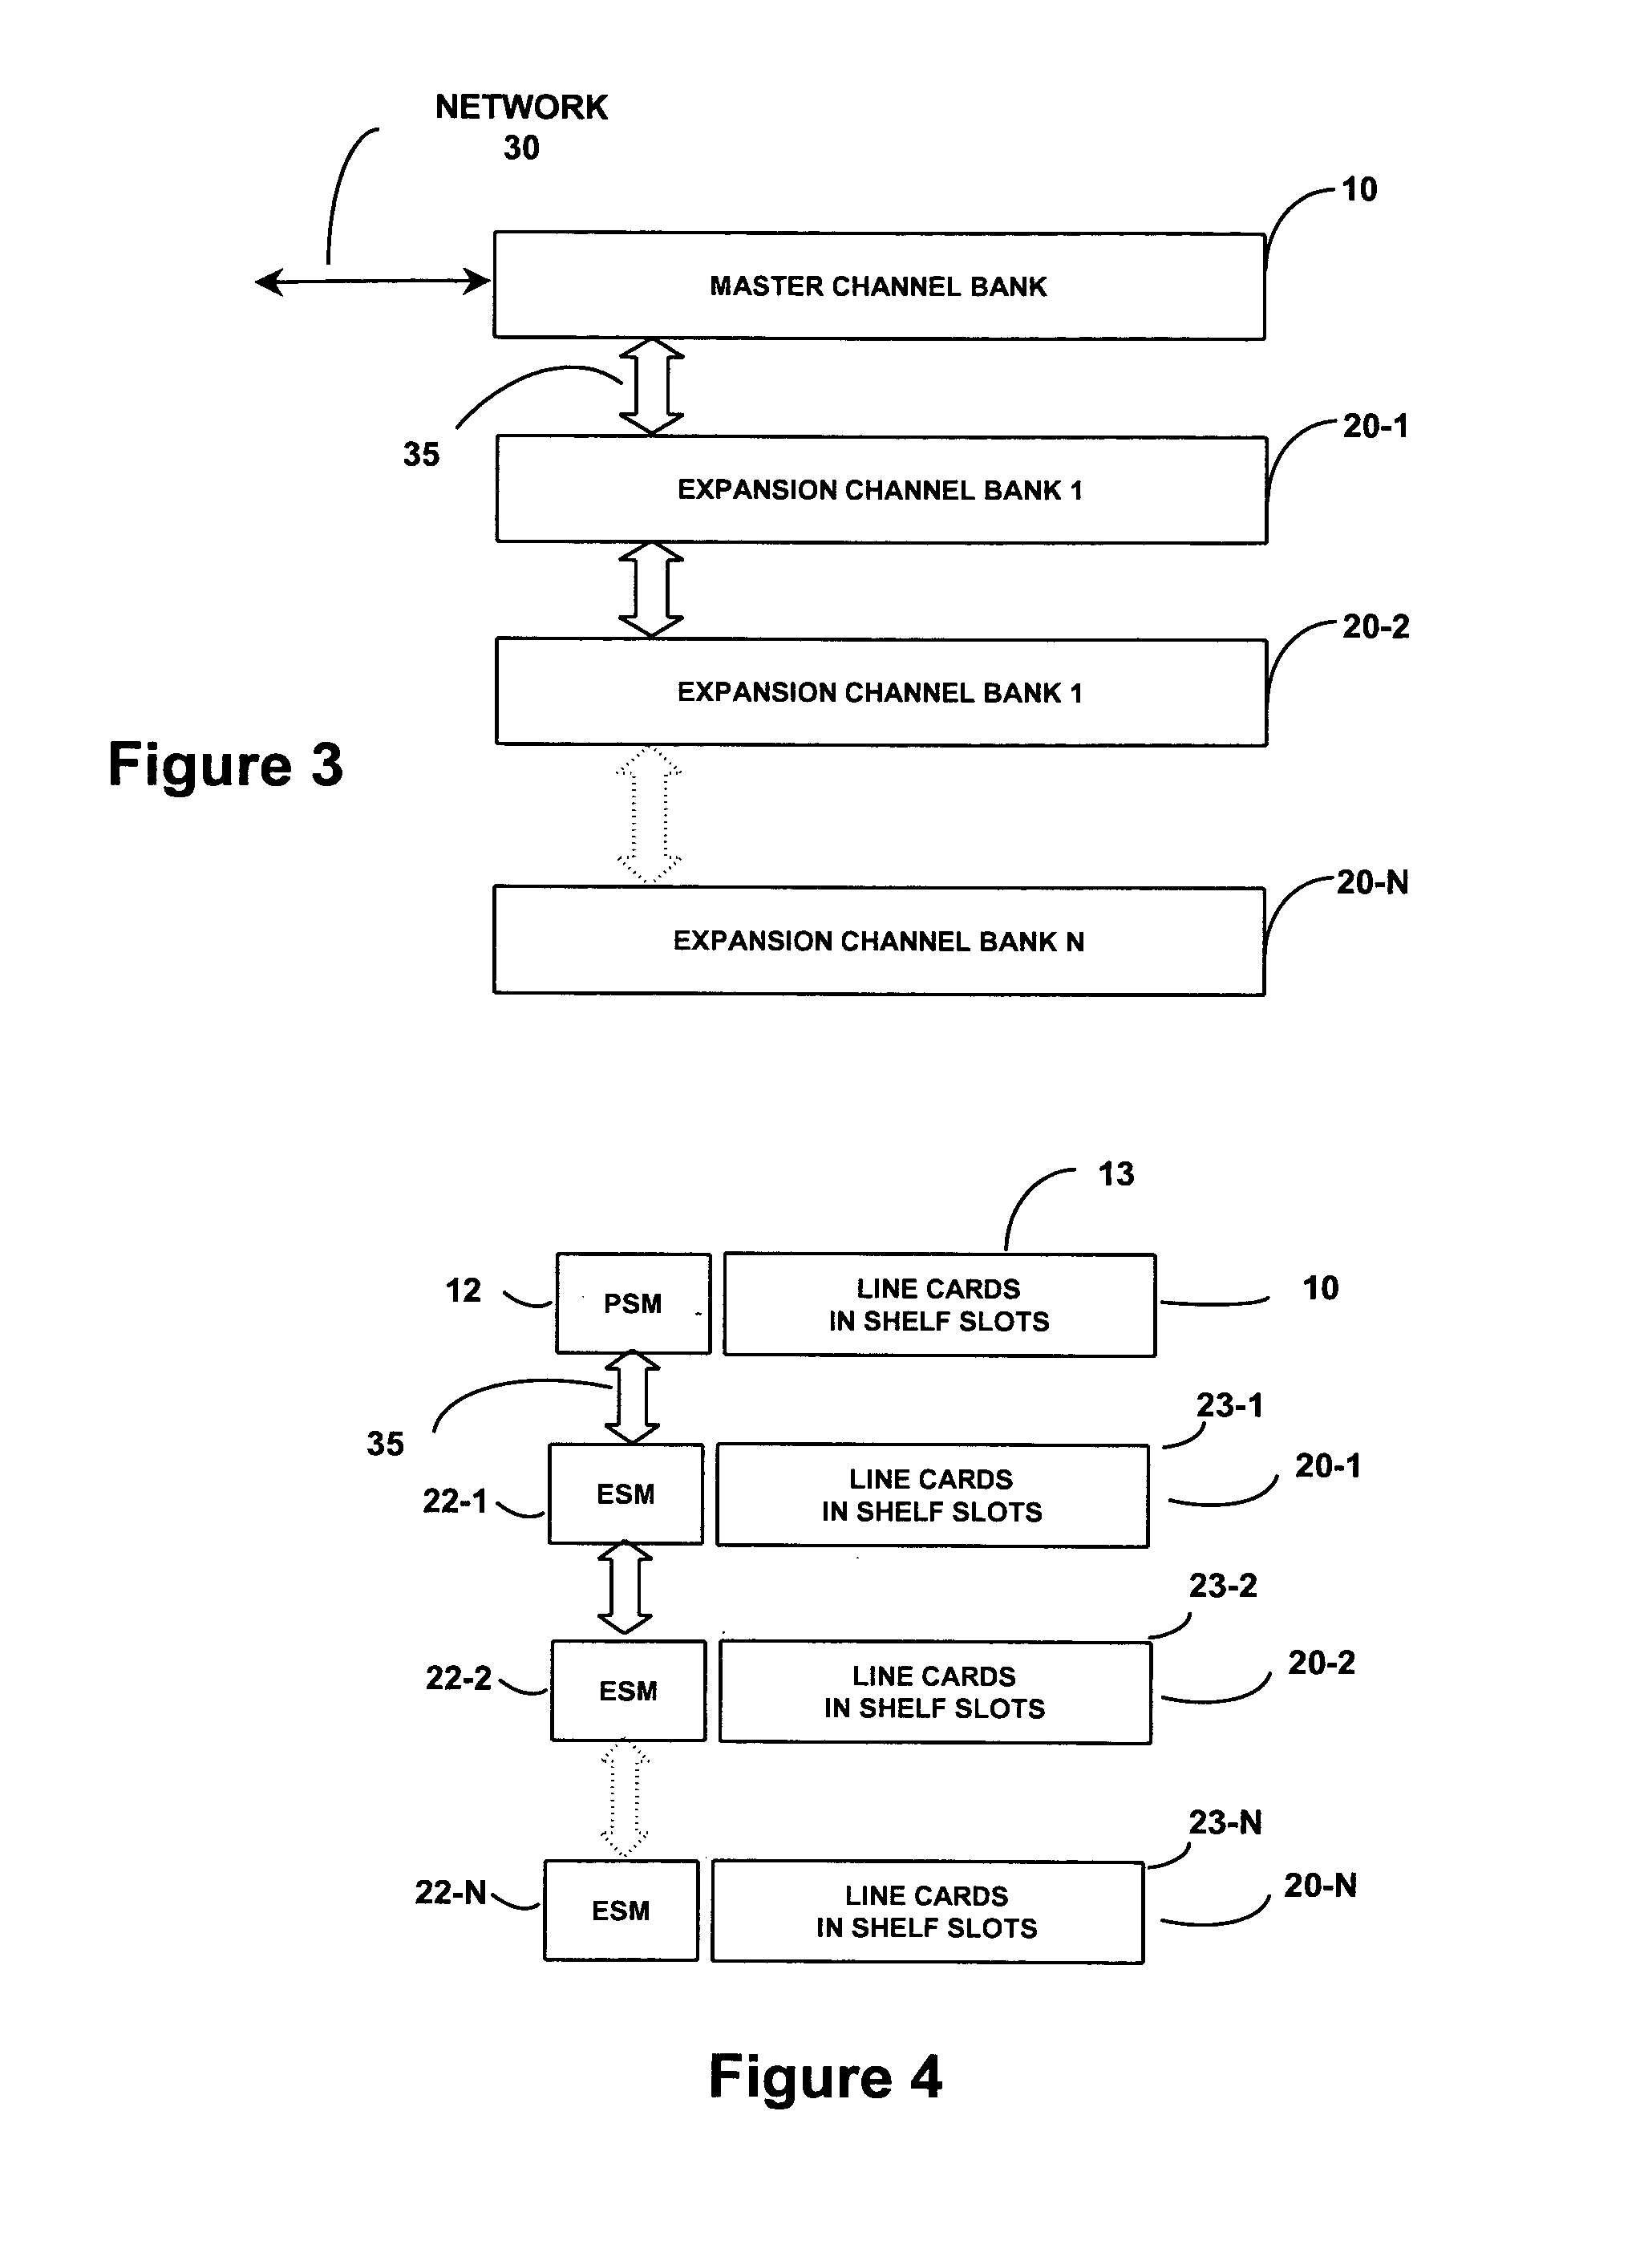 System architecture for linking channel banks of a data communication system